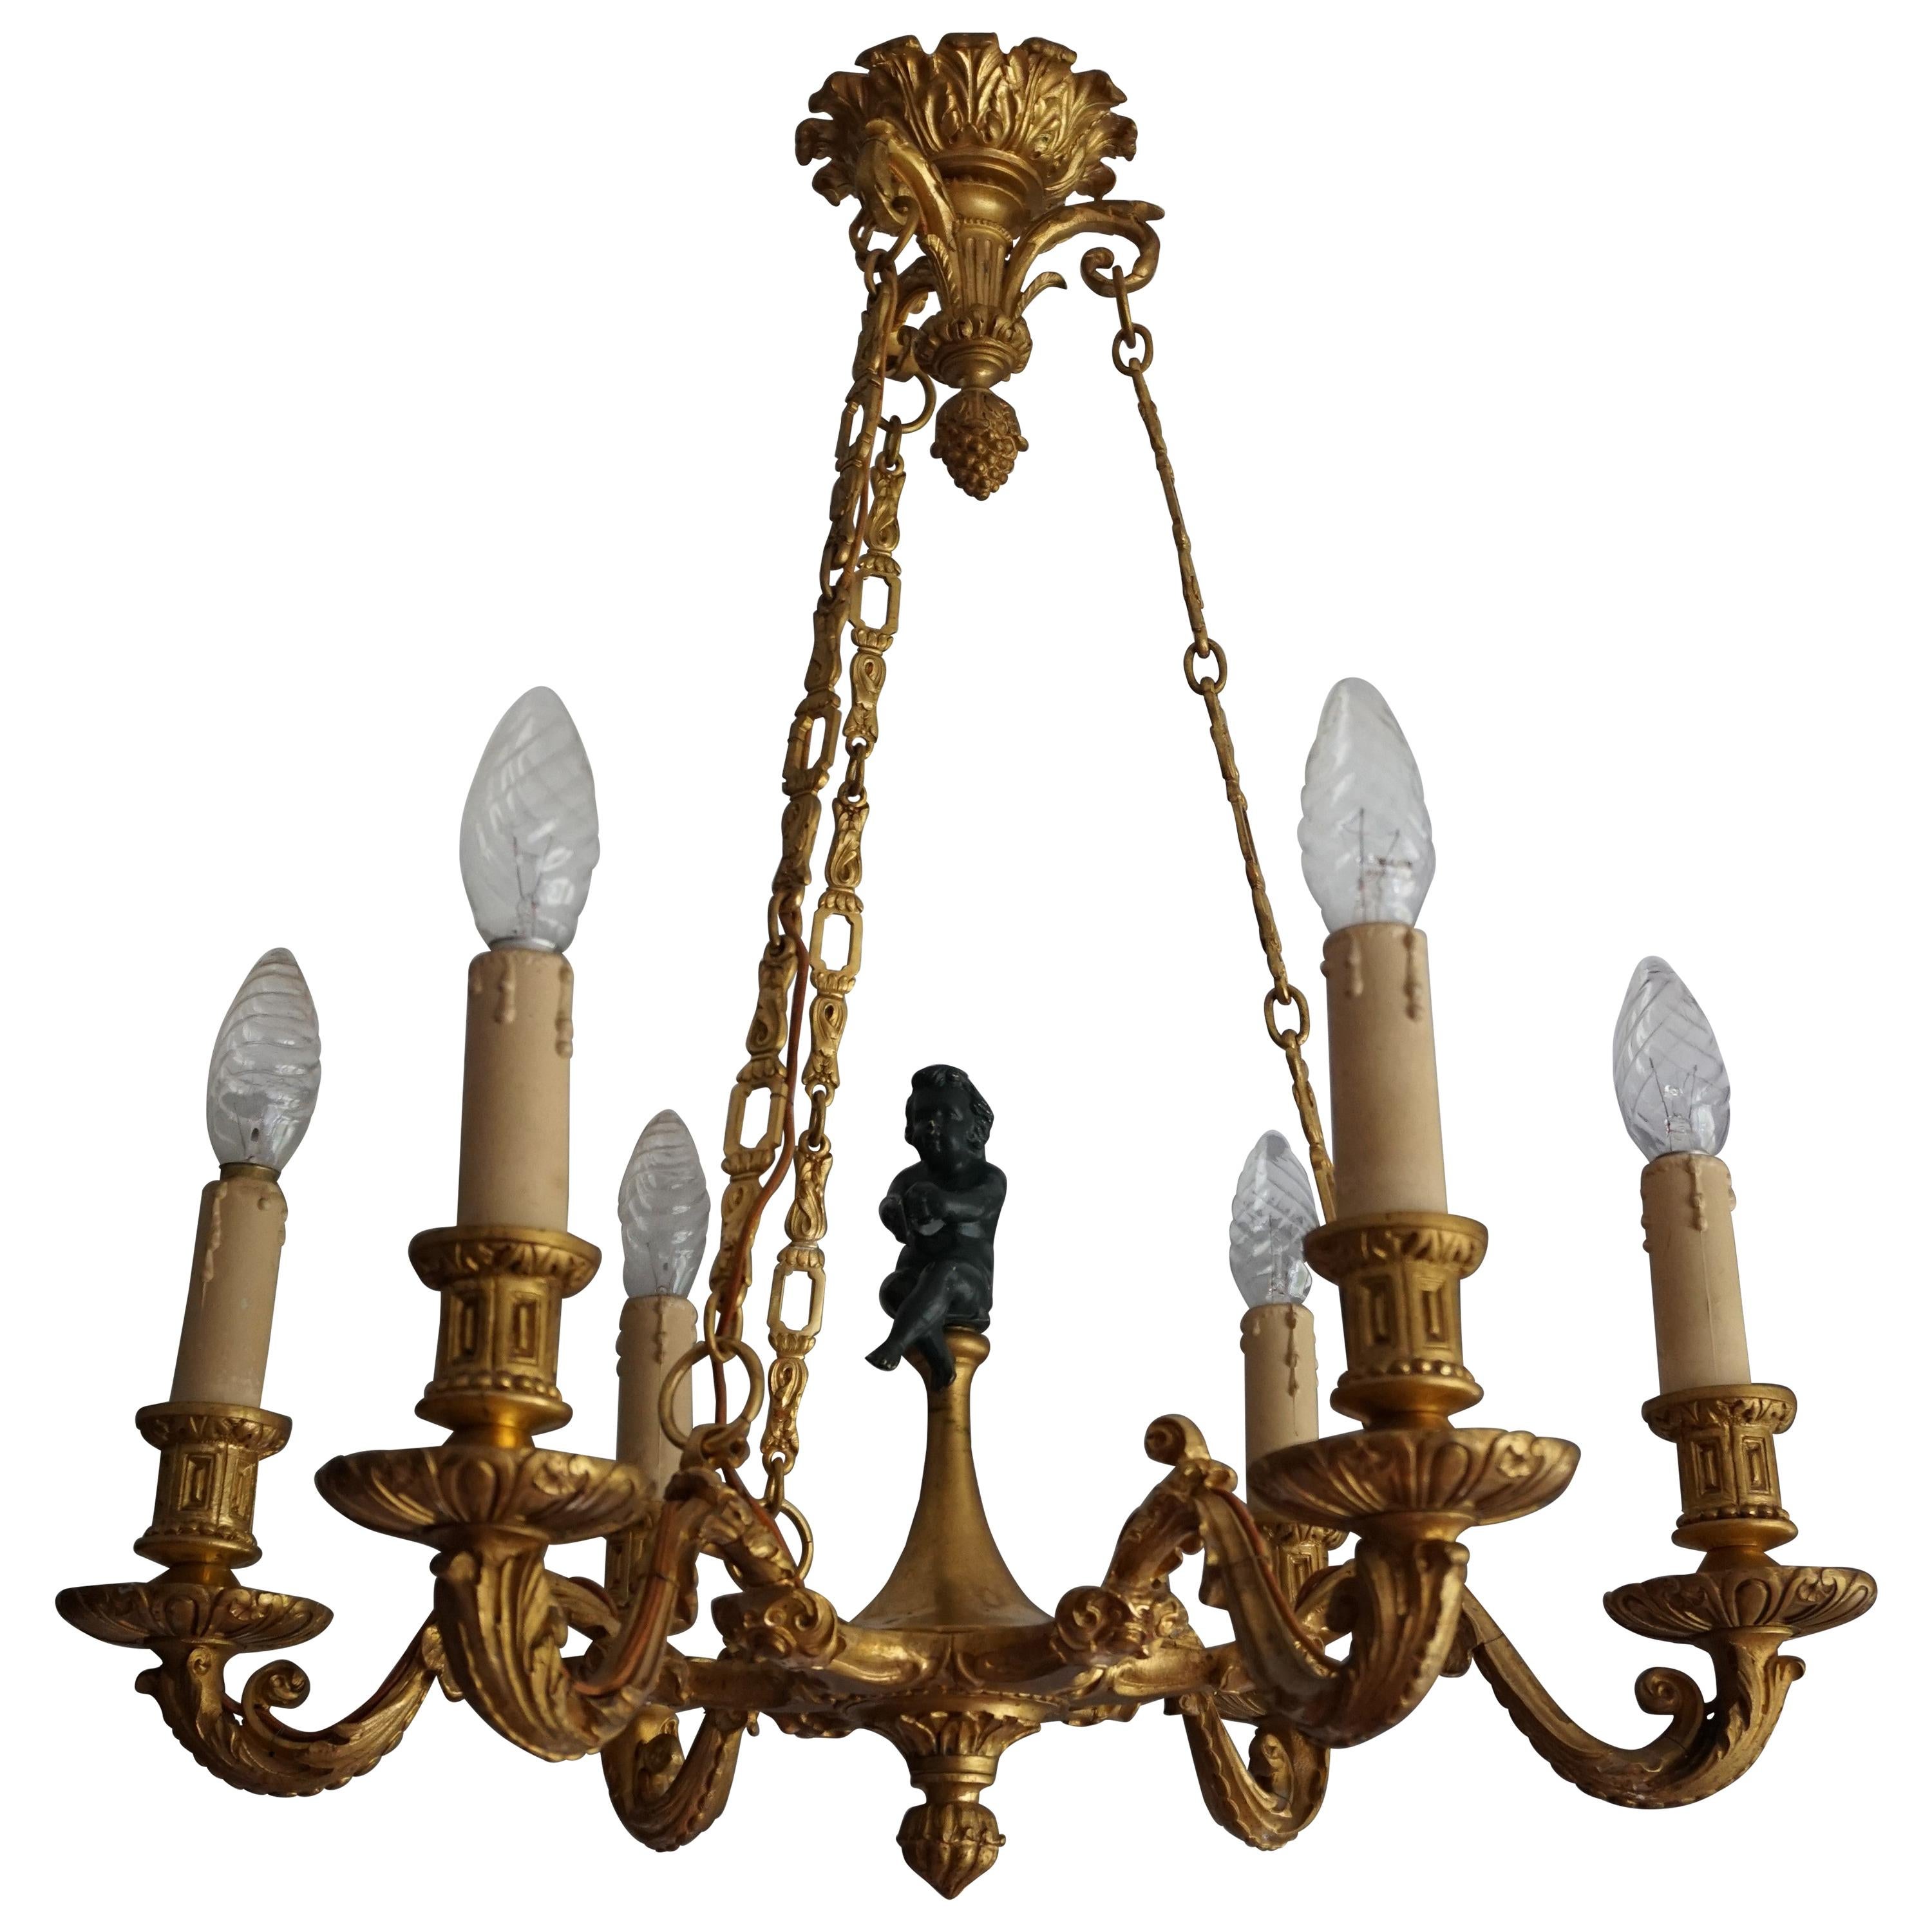 Stunning Little Gilt Bronze Chandelier with Scrolling Leafs and Putto Sculpture For Sale